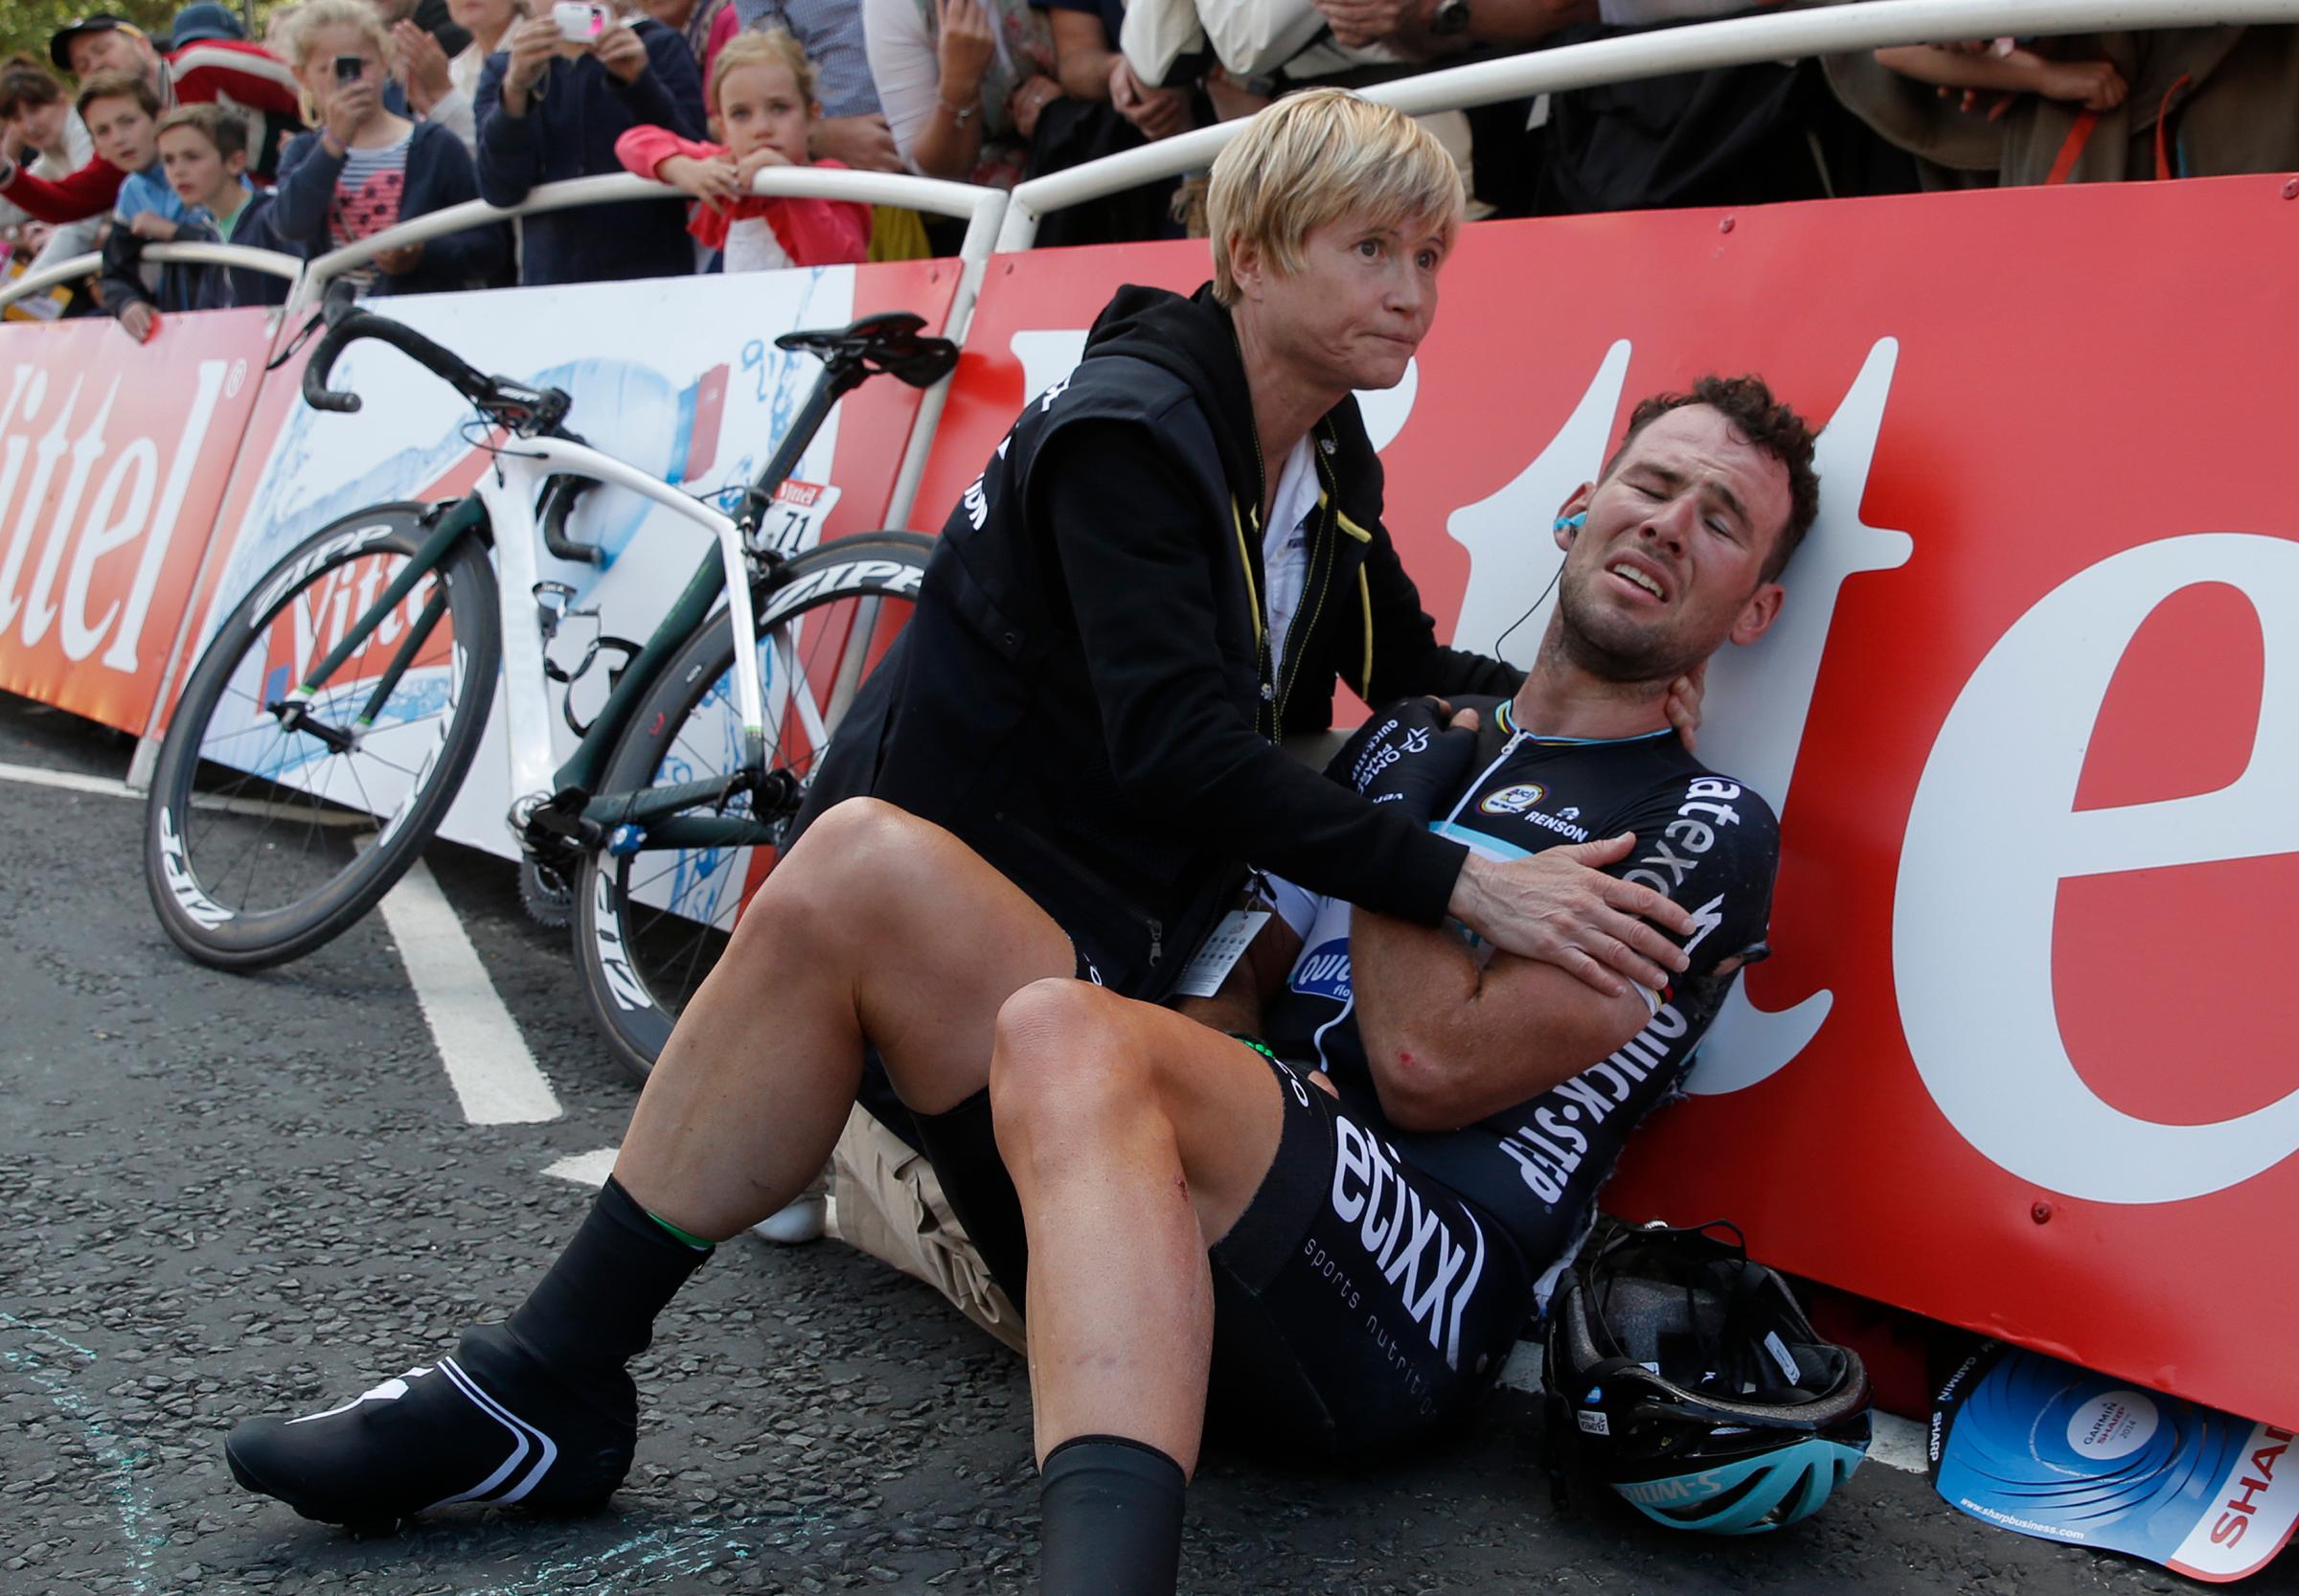 Omega Pharma-Quick Step team rider Mark Cavendish of Britain gets assistance after crashing during a mass sprint next to the finish line of the first 190.5 km stage of the Tour de France cycling race from Leeds to Harrogate on July 5, 2014.